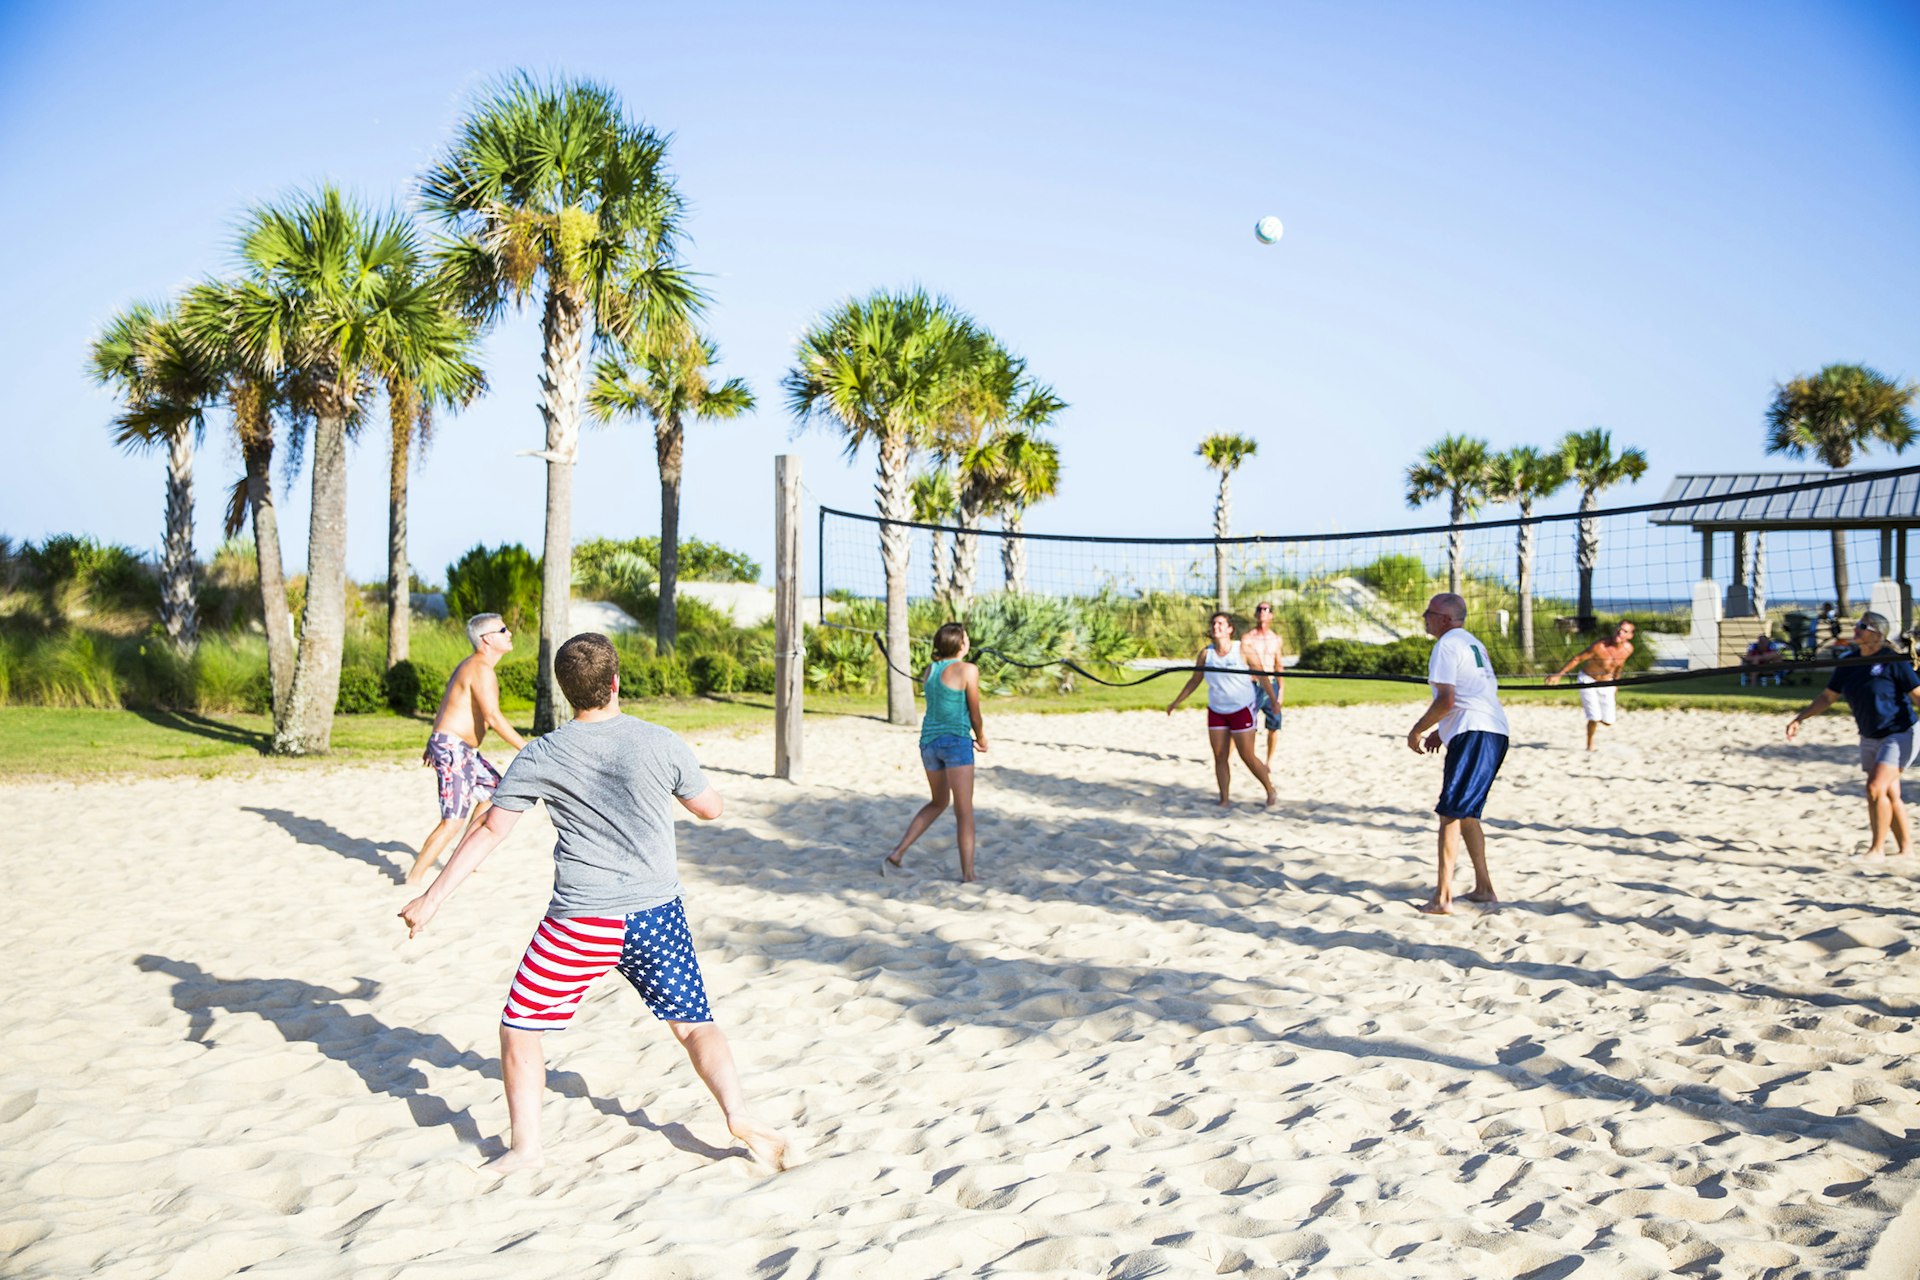 A group of people playing beach volleyball at a beach resort